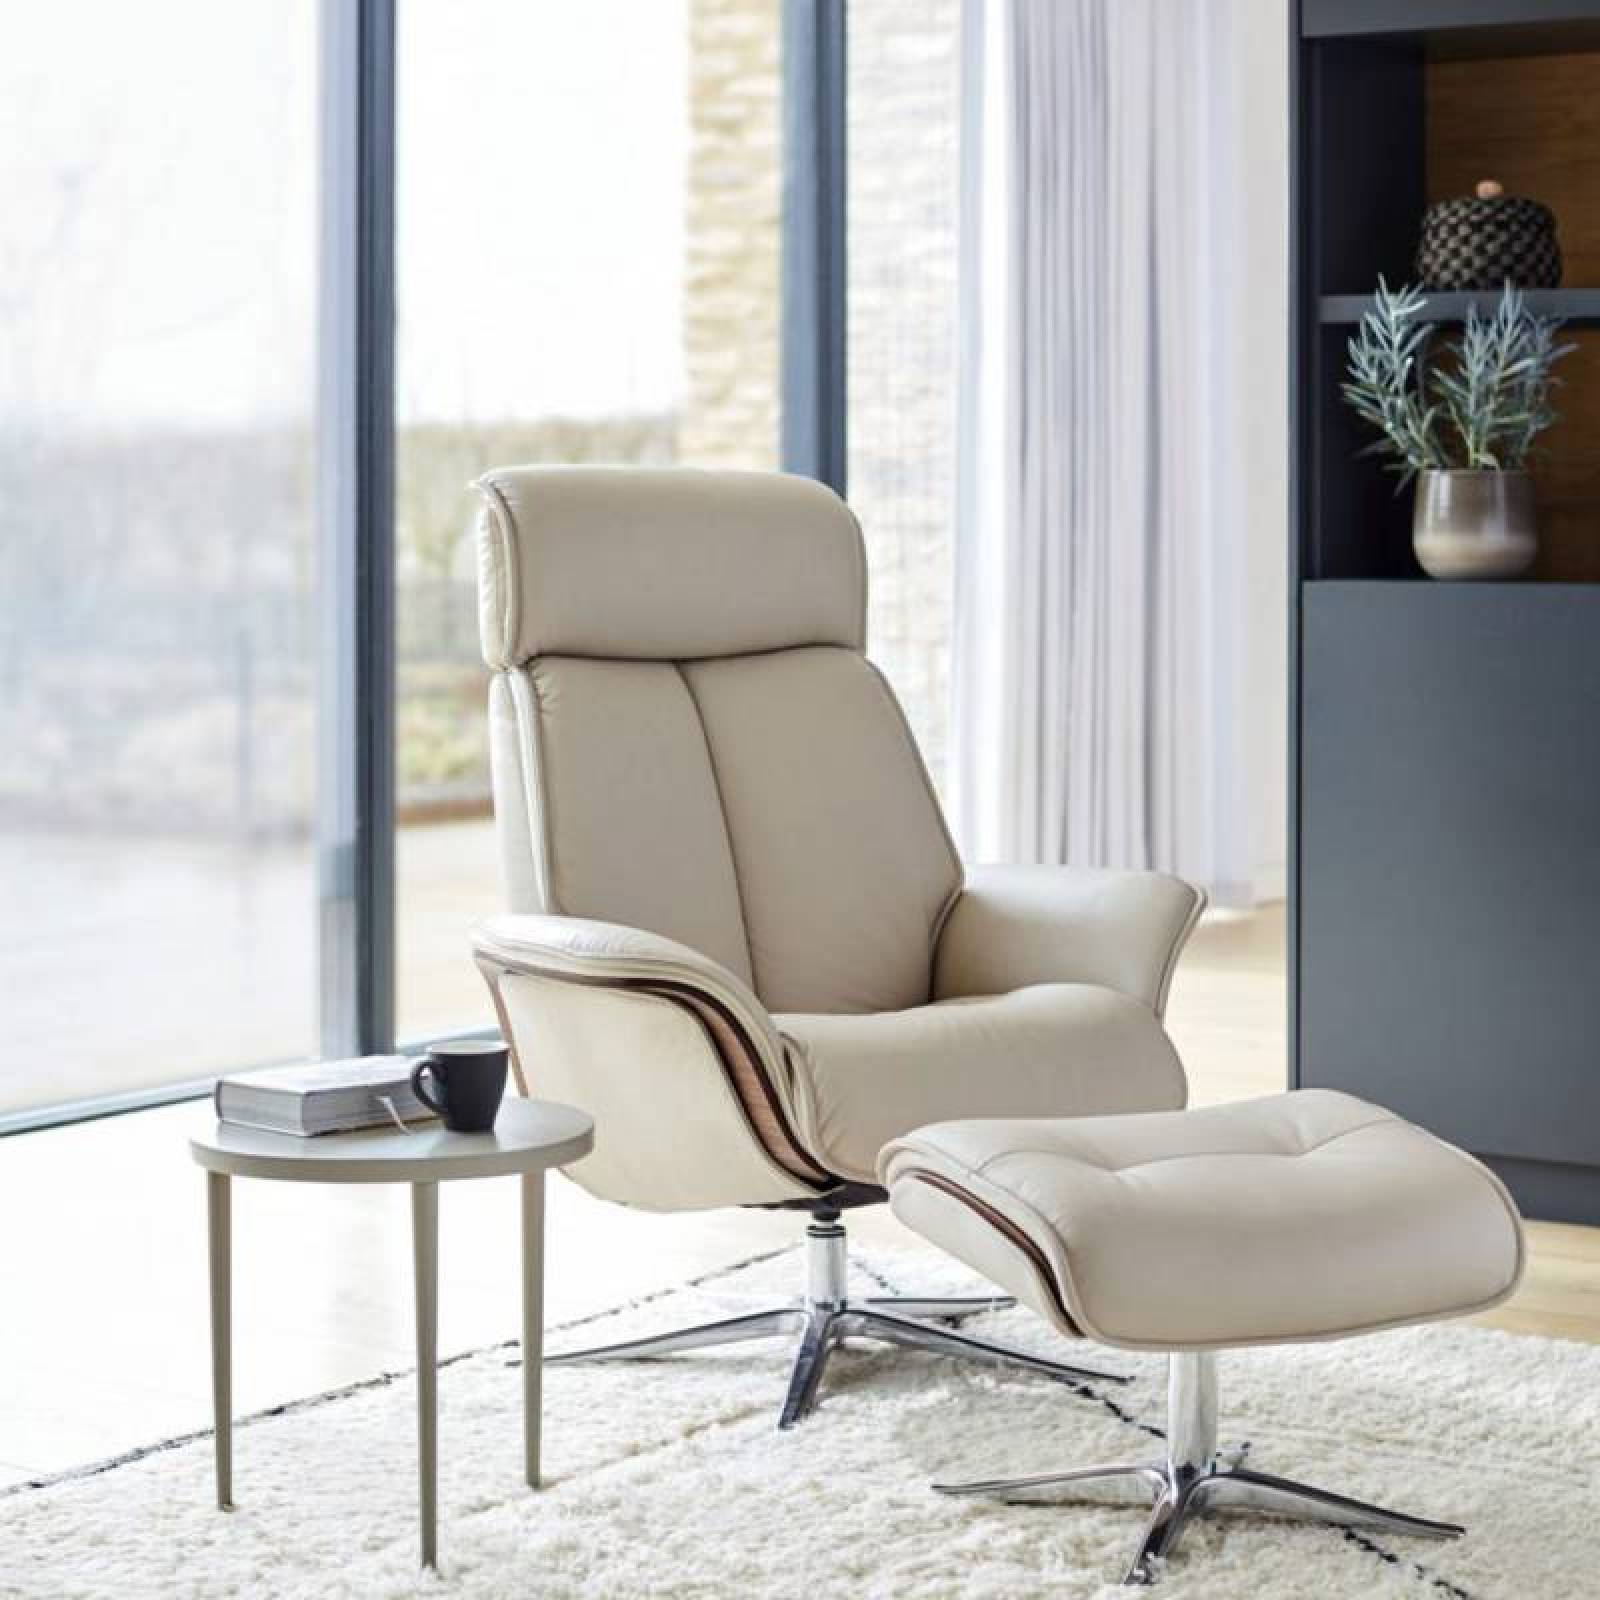 G Plan - The Lund Recliner Armchair & Footstool - Fabric thumbnails